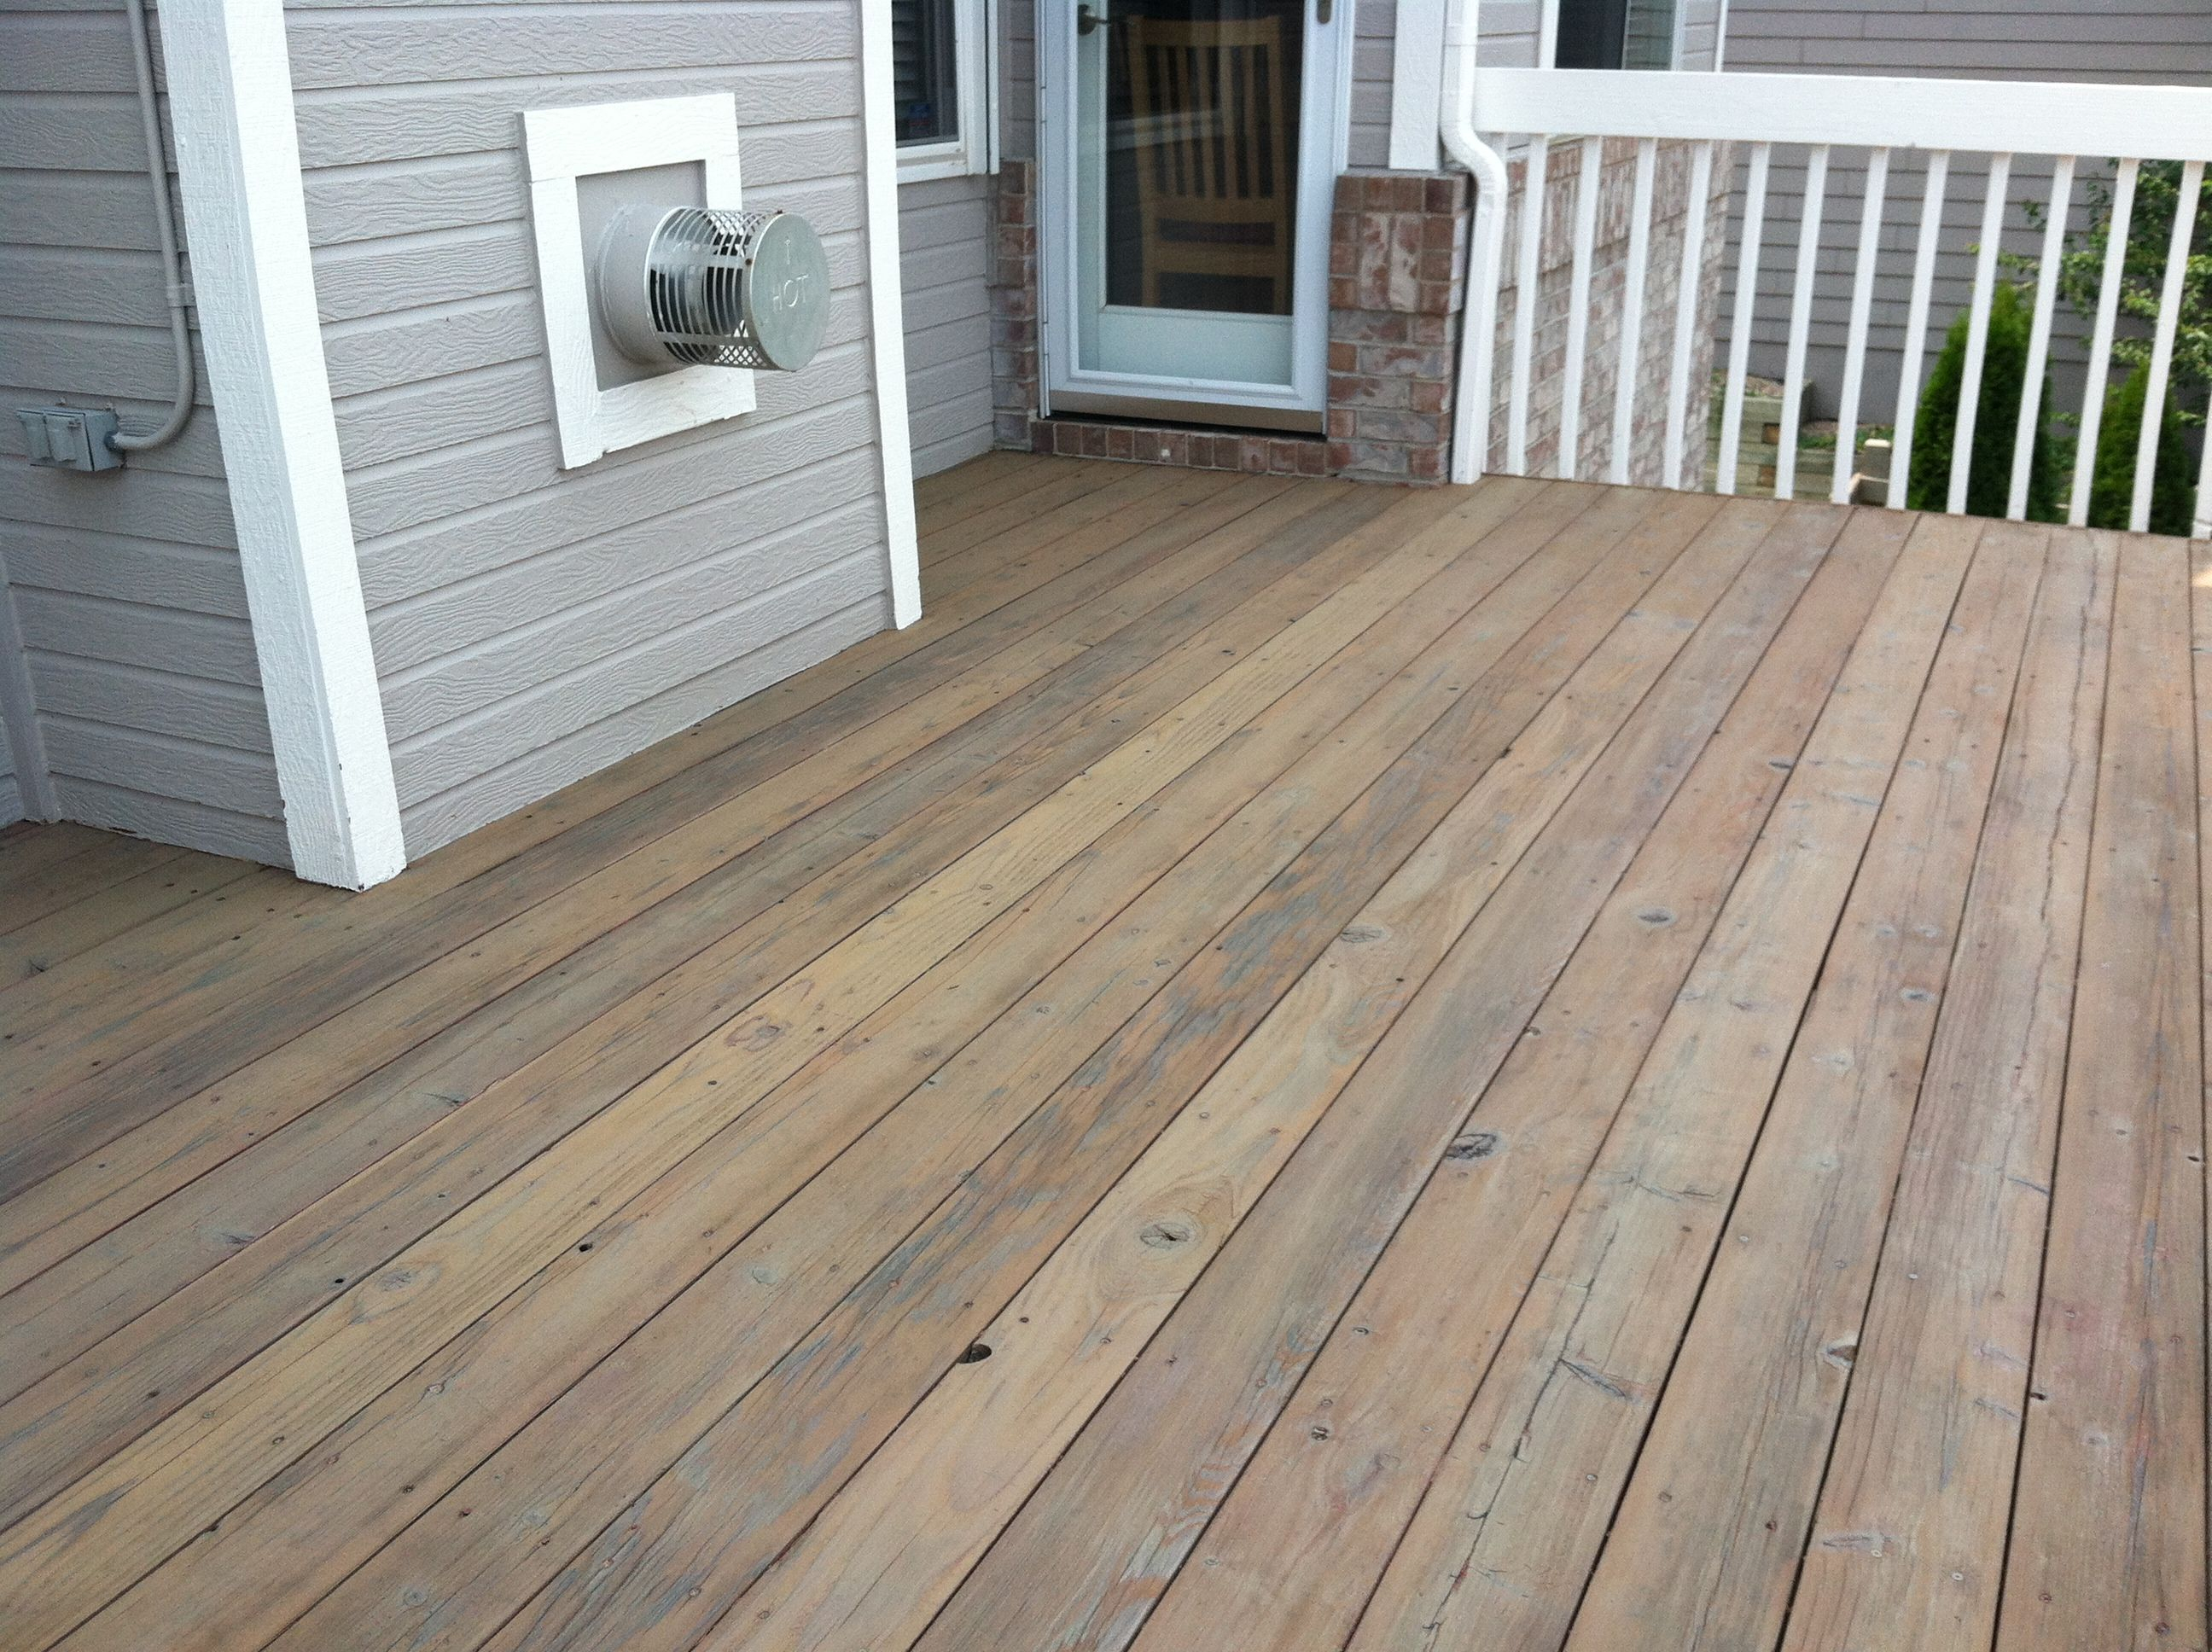 Cabot Deck Stain In Semi Transparent Taupe Best Deck Stains Deck within dimensions 2592 X 1936